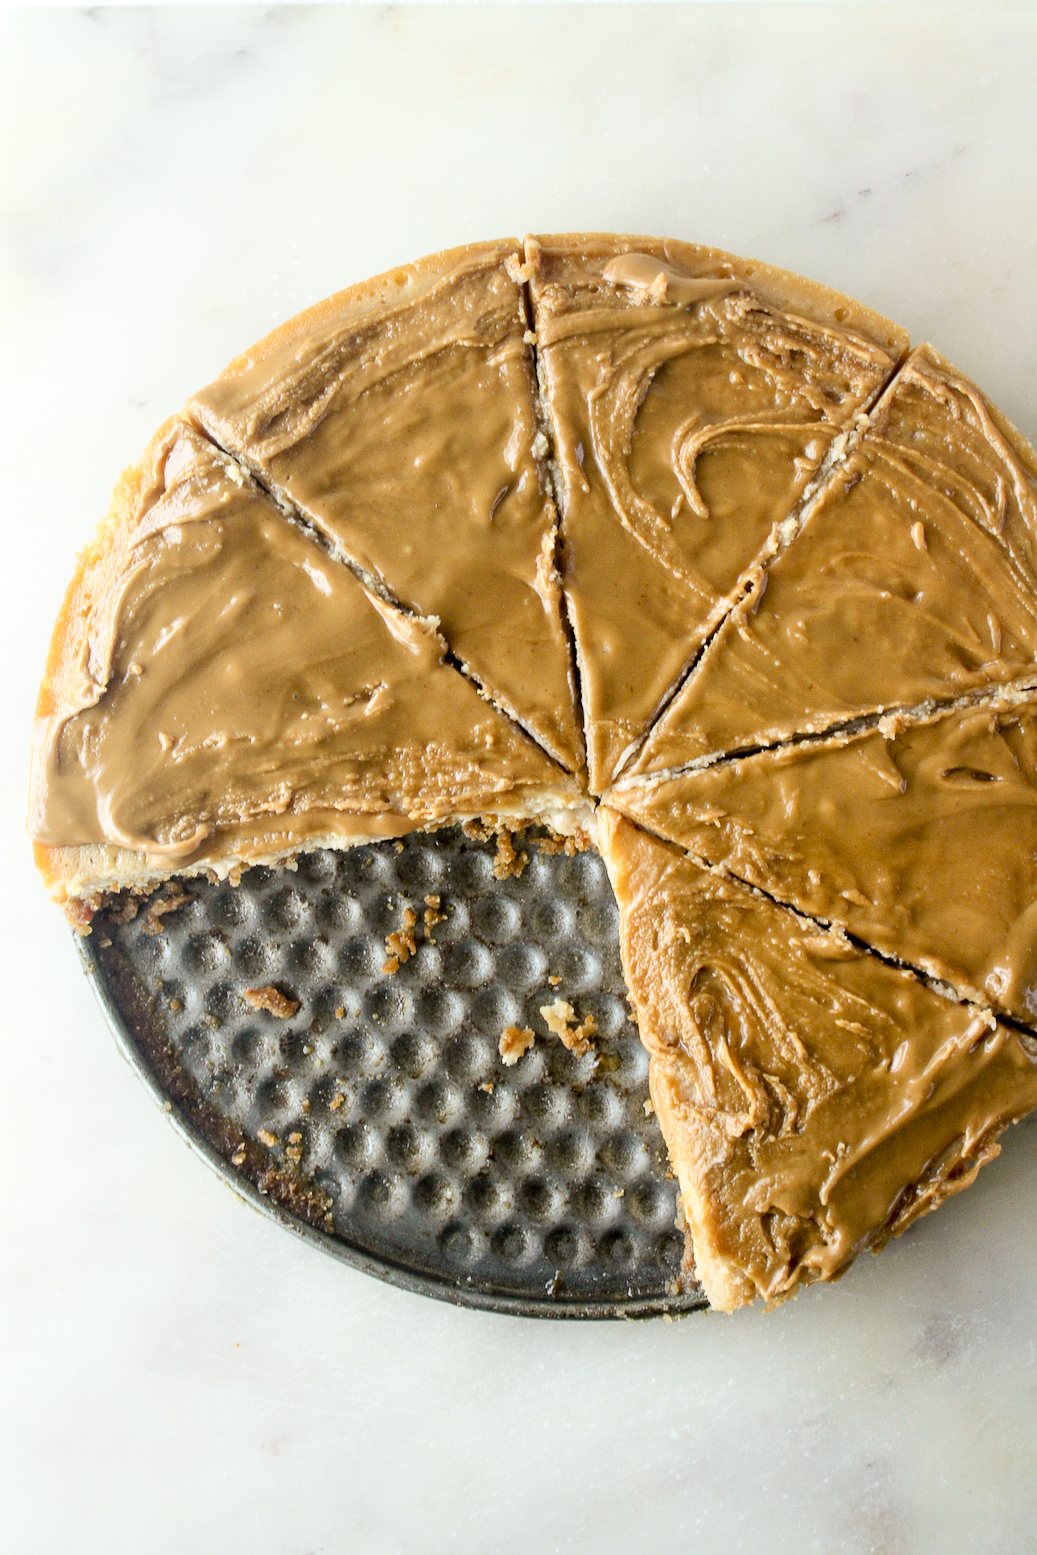 Rich and creamy baked cookie butter cheesecake on a Biscoff cookie base!